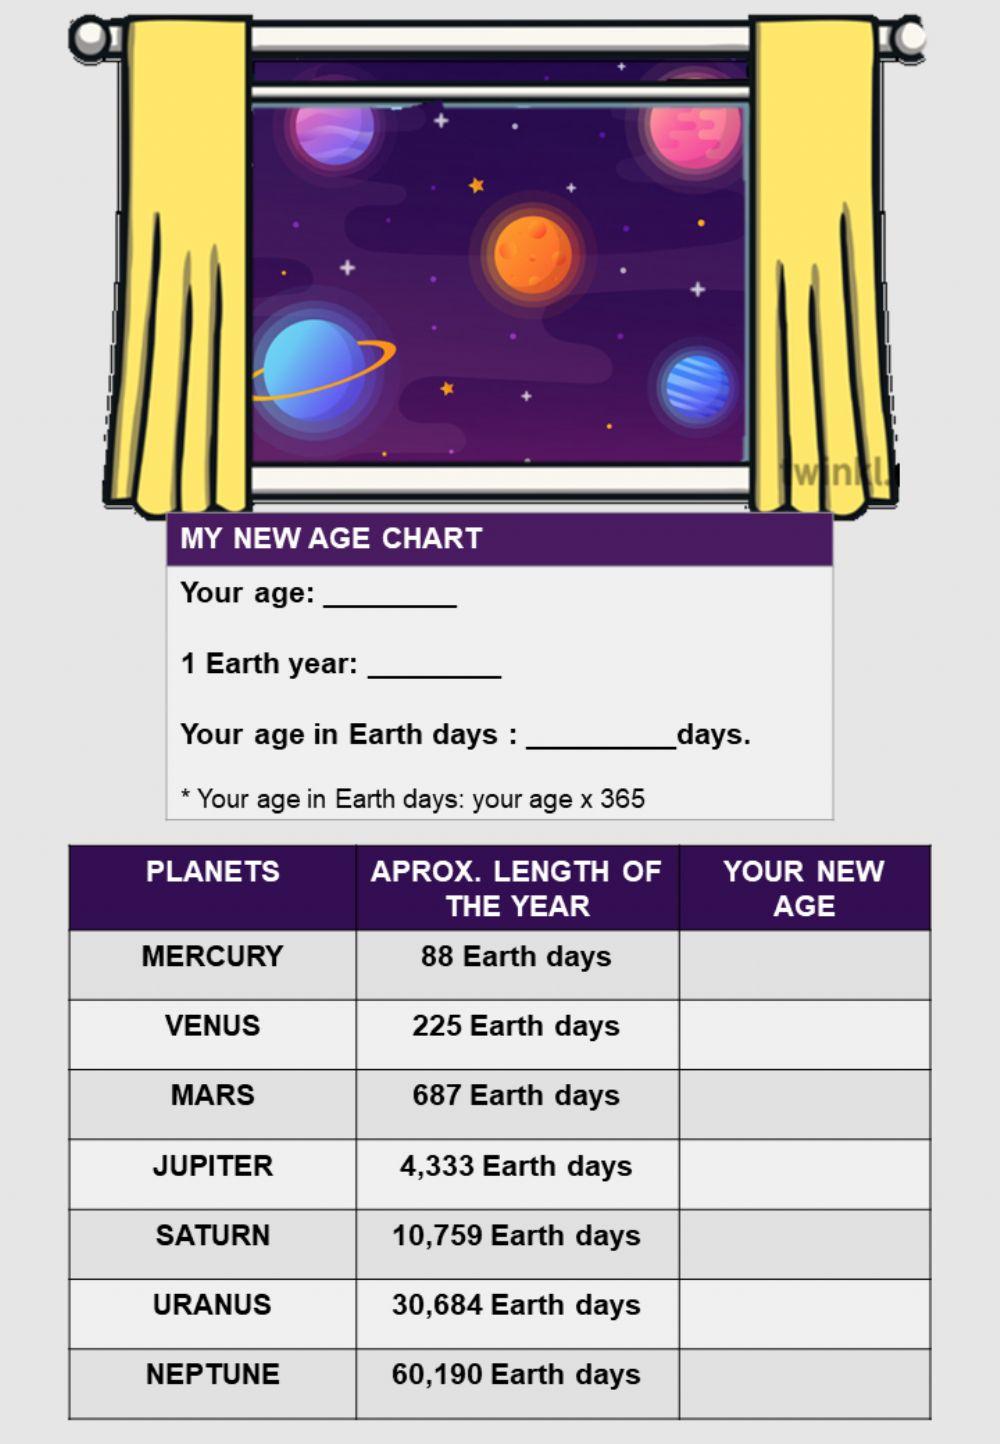 What's your Age in Venus?